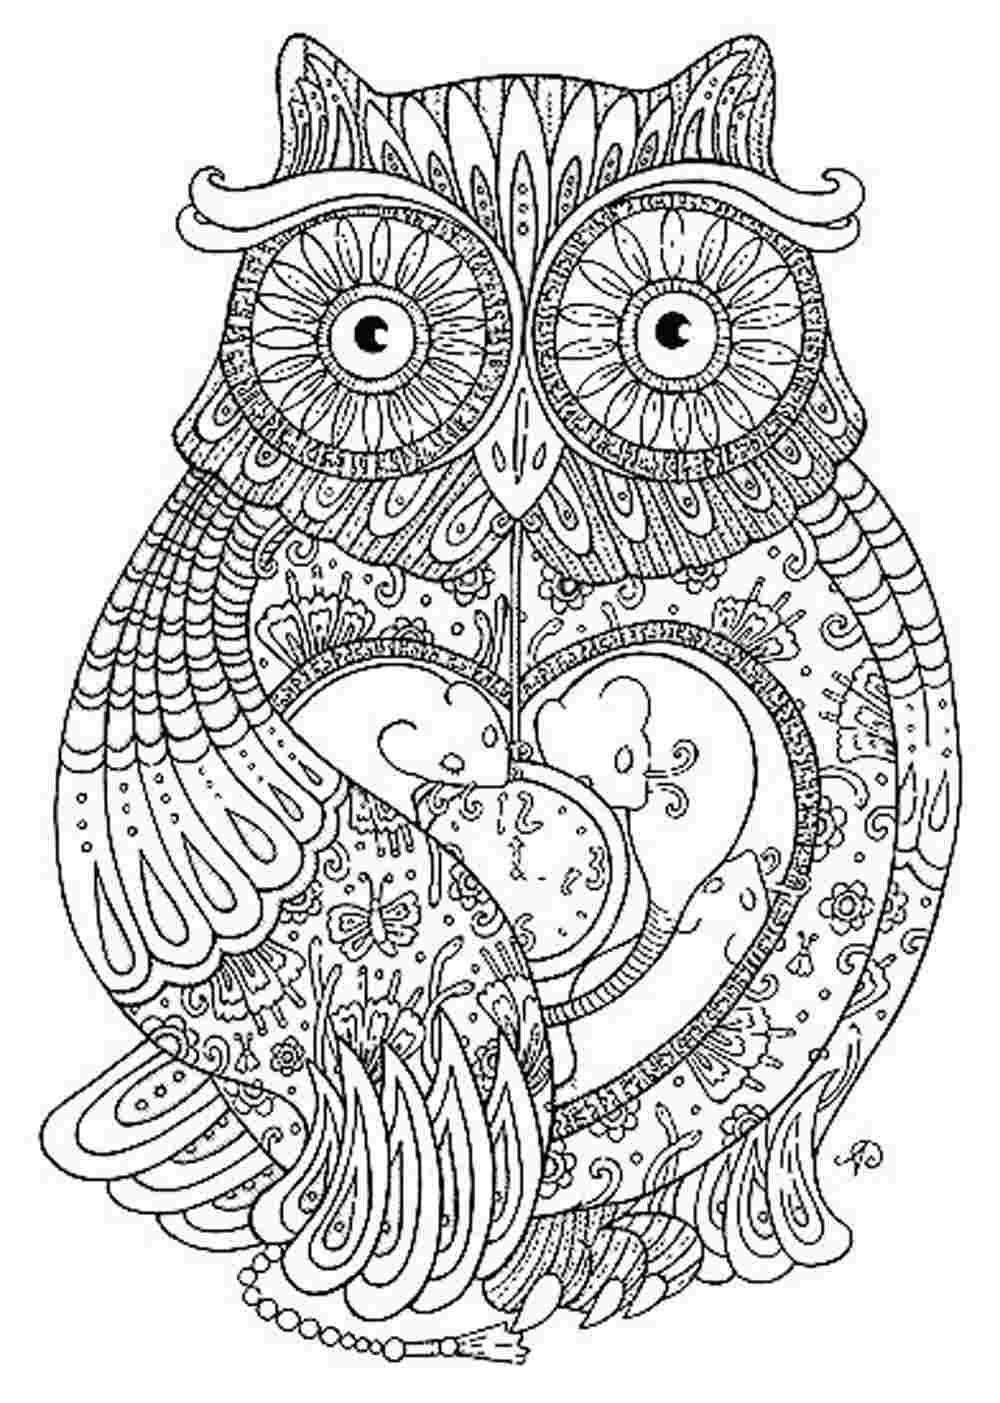 Free Owl Coloring Pages For Adults
 Cute Owl Coloring Page 5599 Bestofcoloring